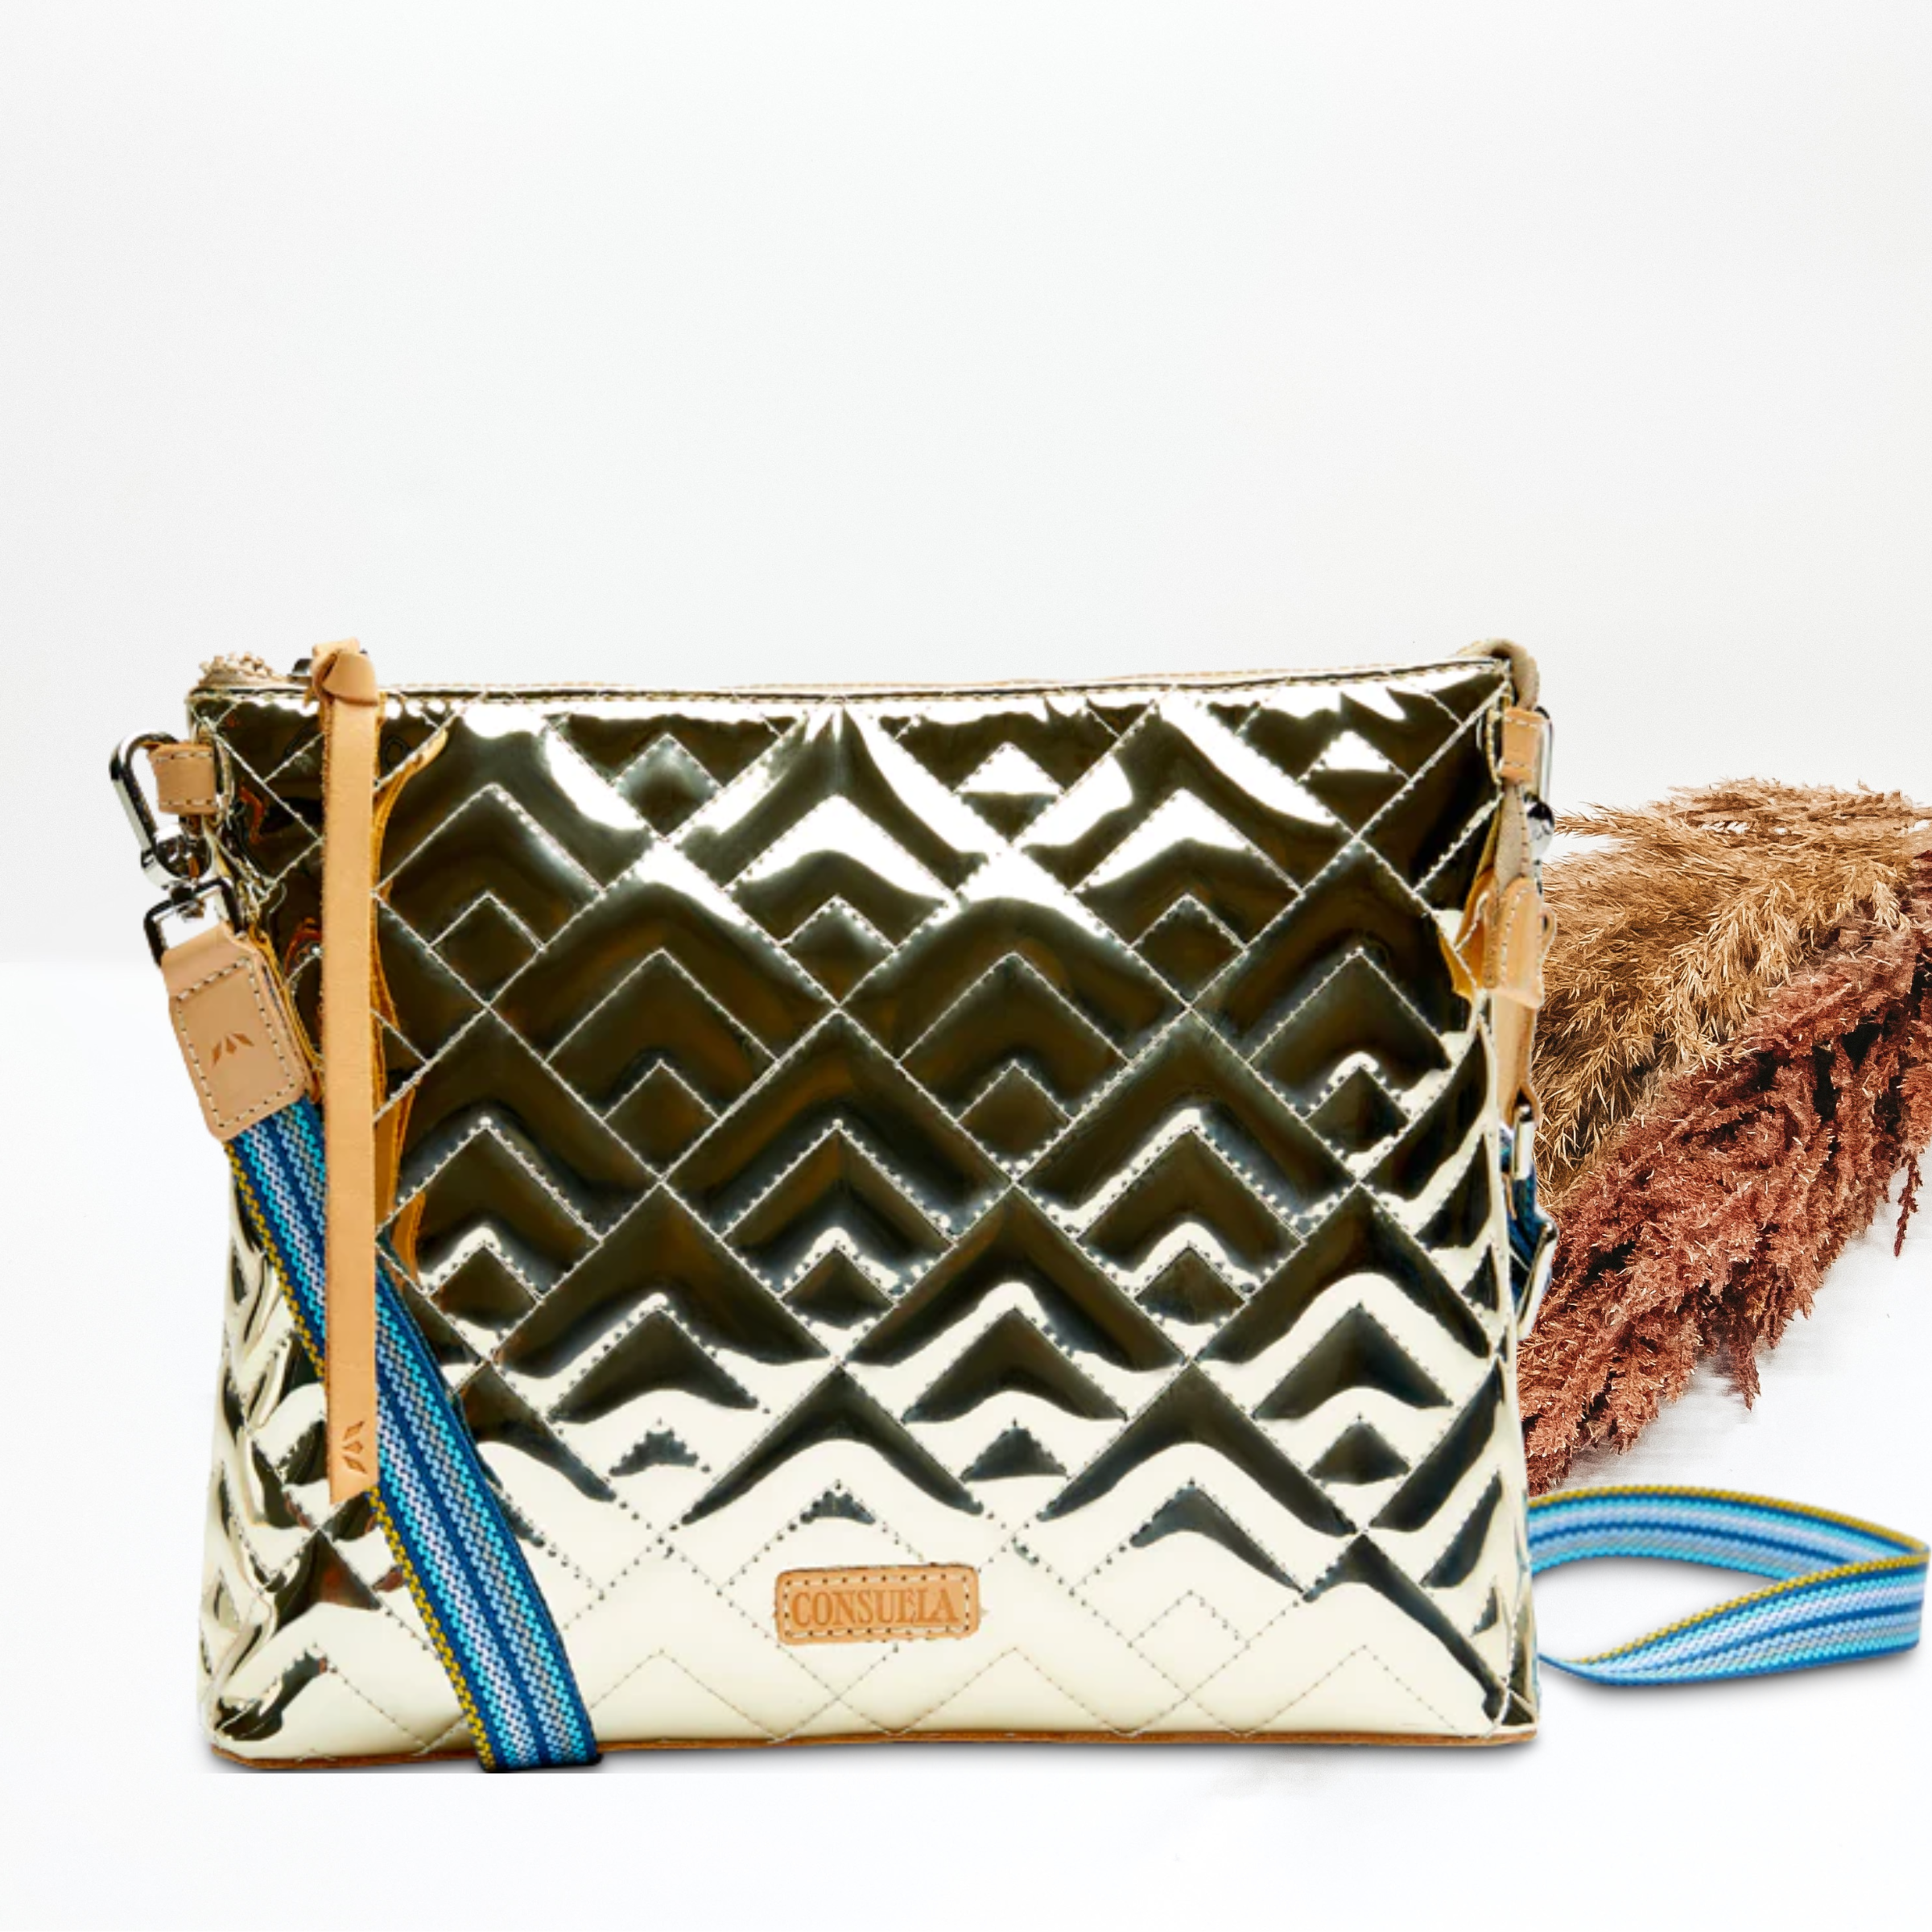 A gold metallic purse with a crossbody strap. Pictured on white background with brown pompous grass on the right side. 